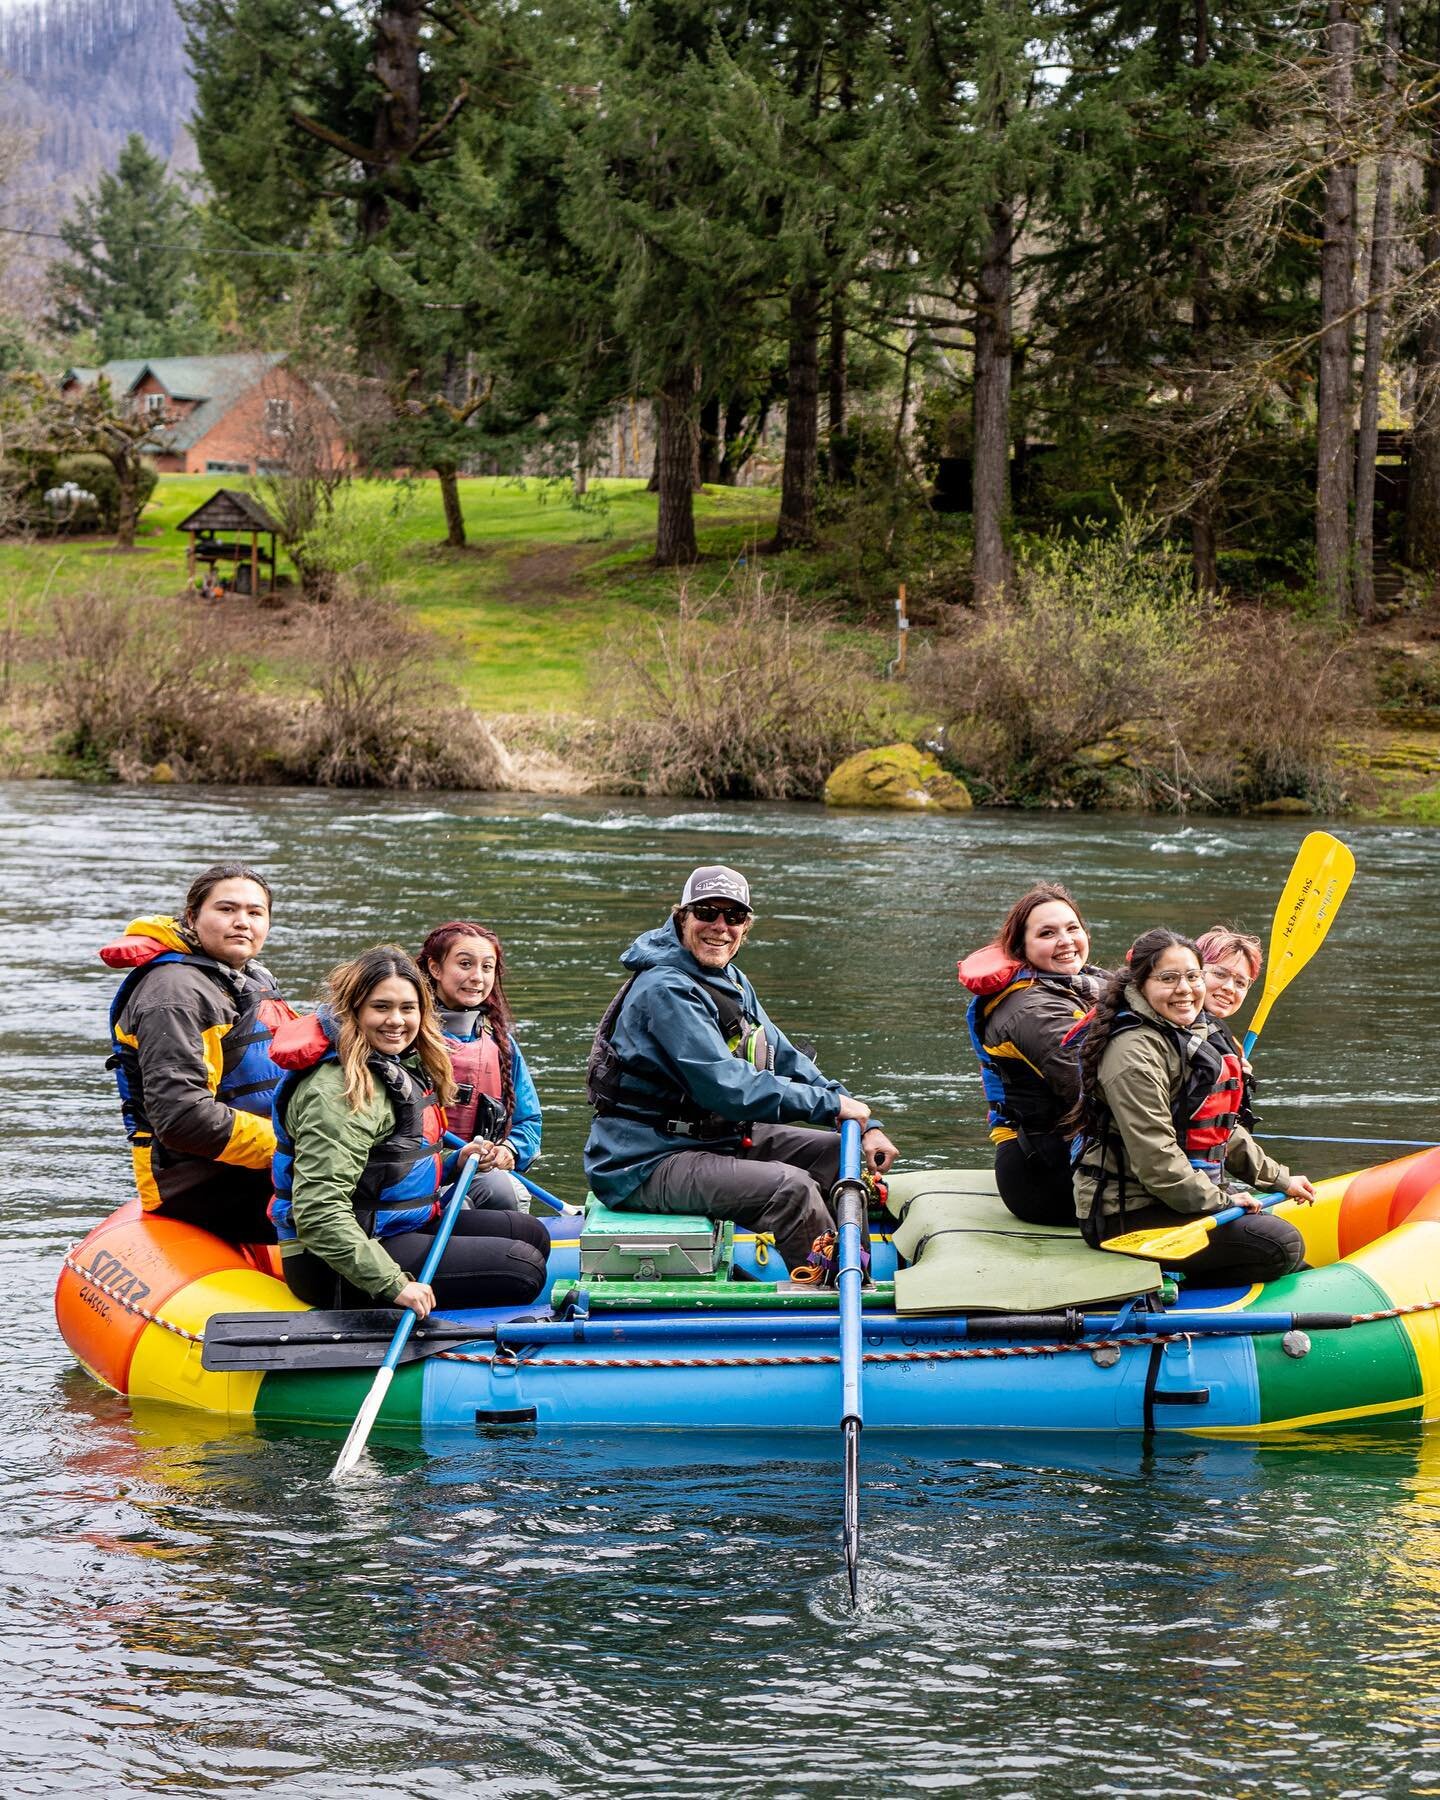 We&rsquo;d like to give a HUGE shout out to the @uoregon, @uo_outdoorprogram, @oregonpaddlesports, Sam Strioch, and our Program Director Ashia Wilson for hosting and helping coordinate our spring Paddle Tribal Waters program in Eugene Oregon. 

Sam n